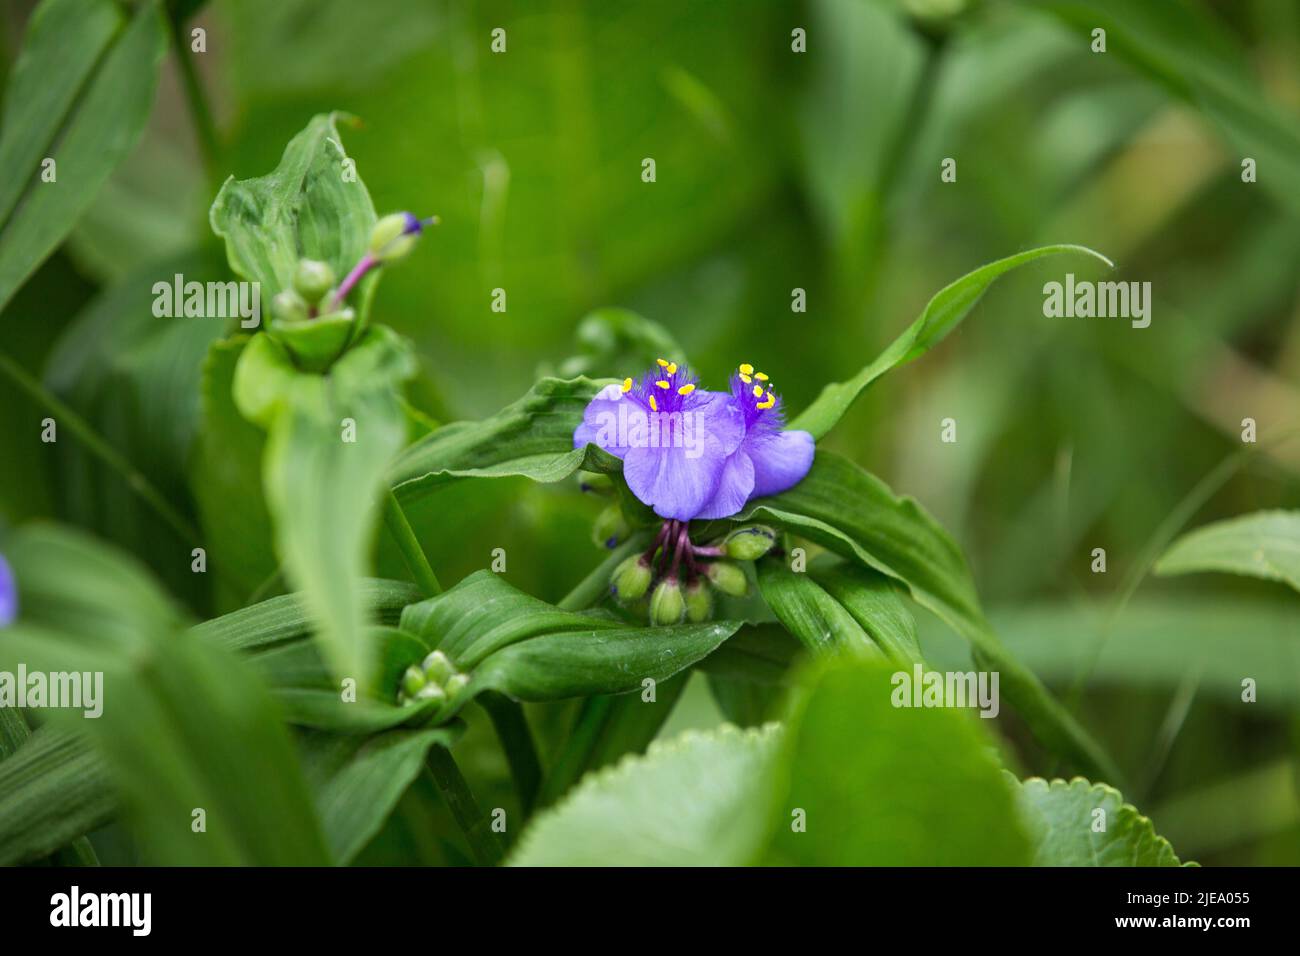 The purple Evolvulus nuttallianus flower or the flower of a species of the morning-glory plant is blooming in the garden Stock Photo